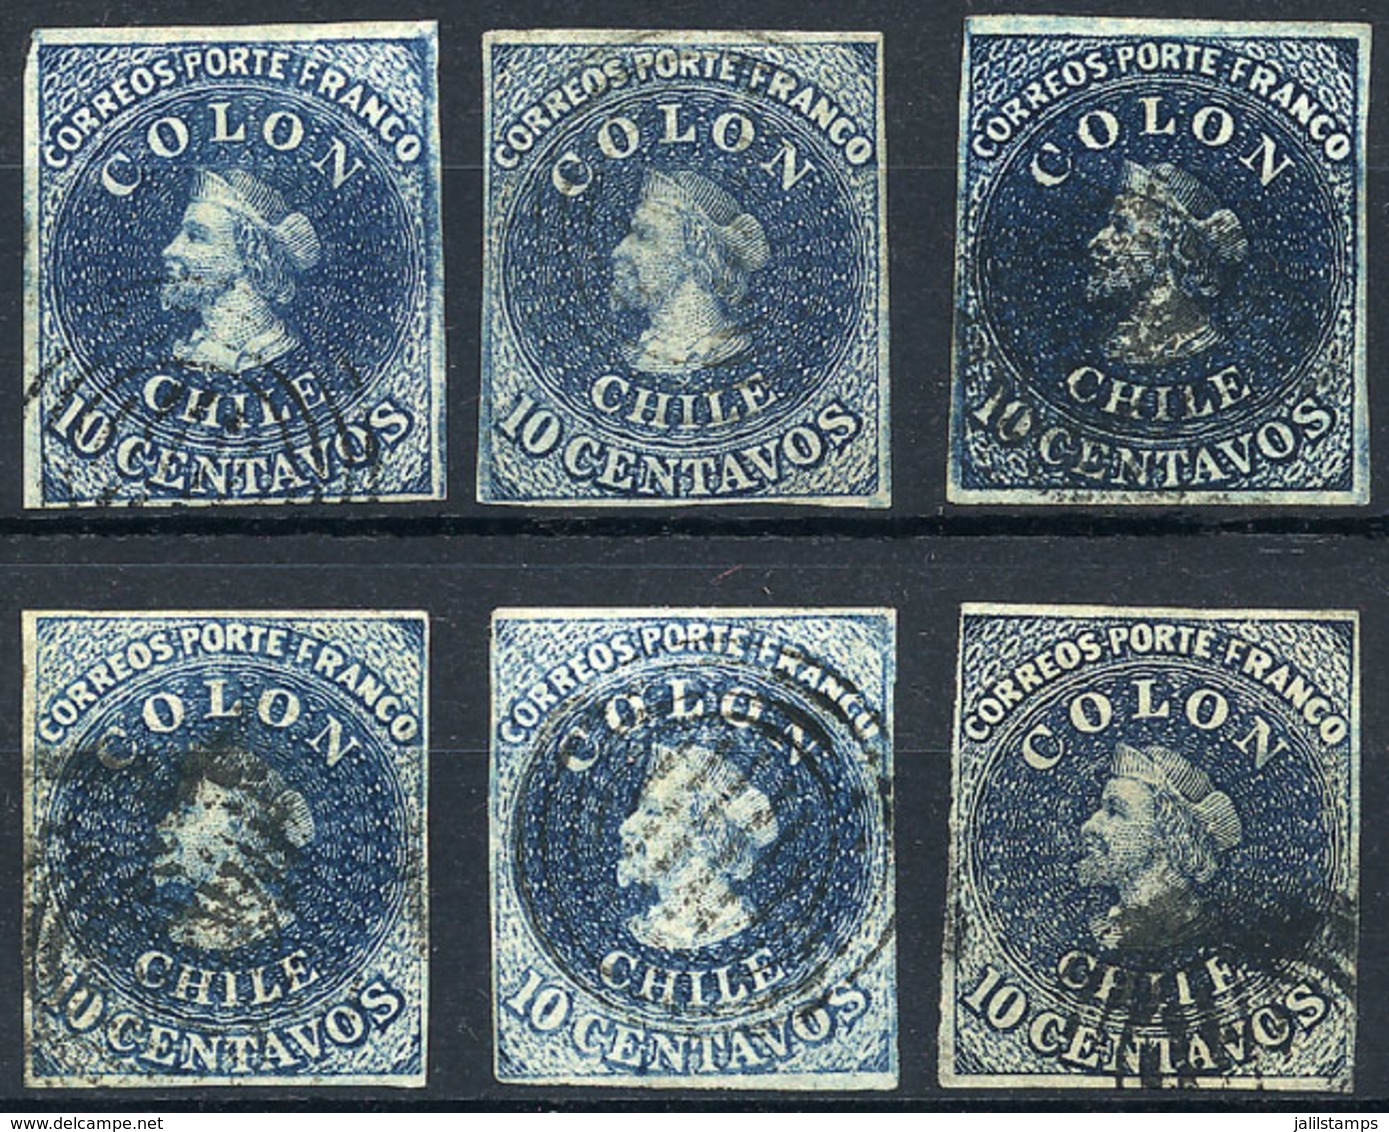 CHILE: Yvert 6 (Sc.10) And Its Color Varieties, 1856/66 10c. Santiago Print (Estancos), 6 Examples Of 4 Margins, Range O - Chili